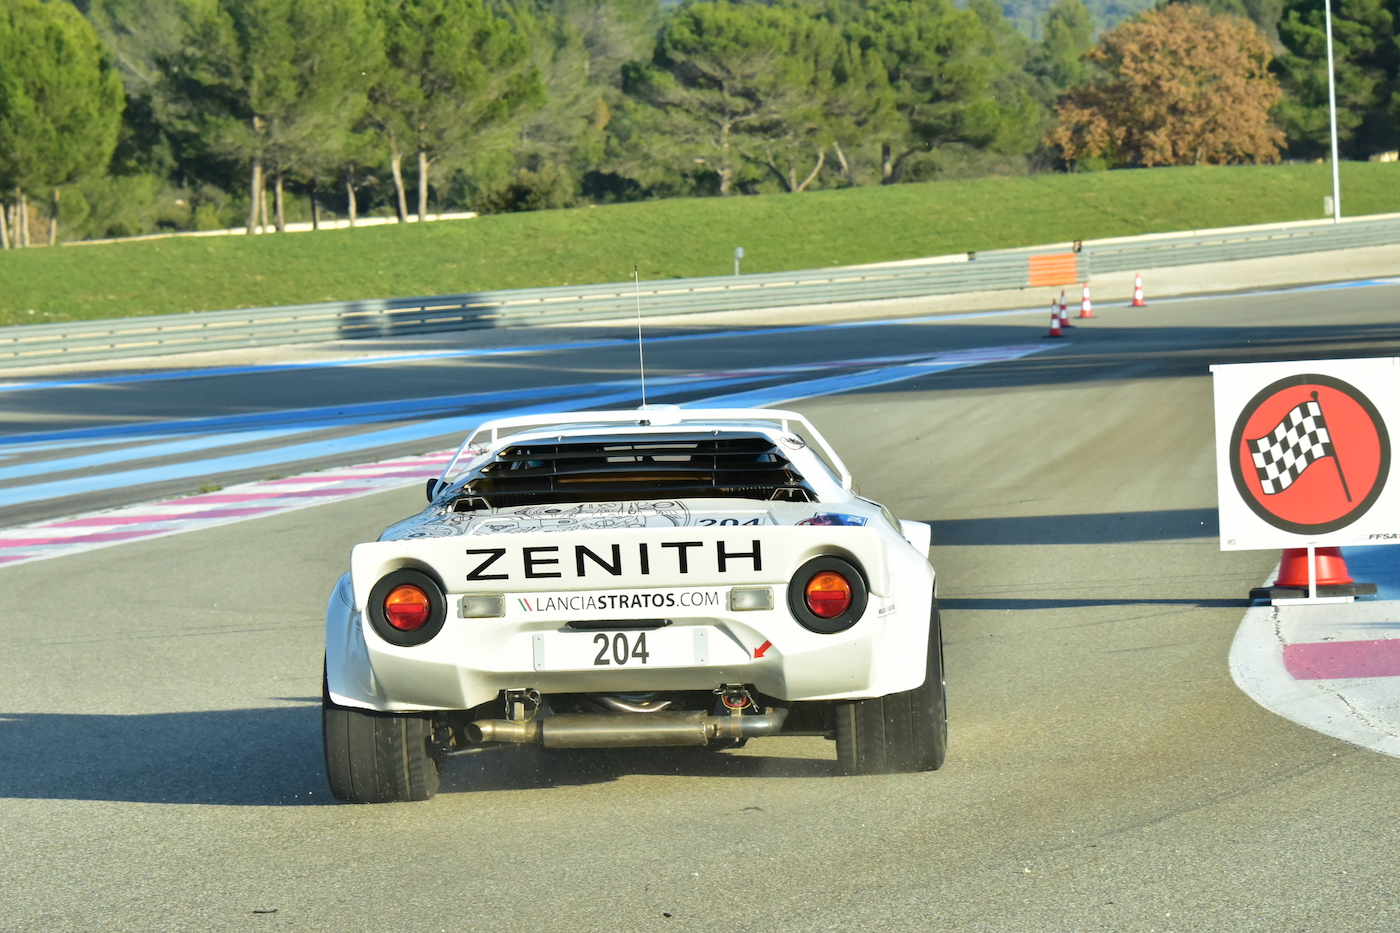 Lancia Stratos in the race